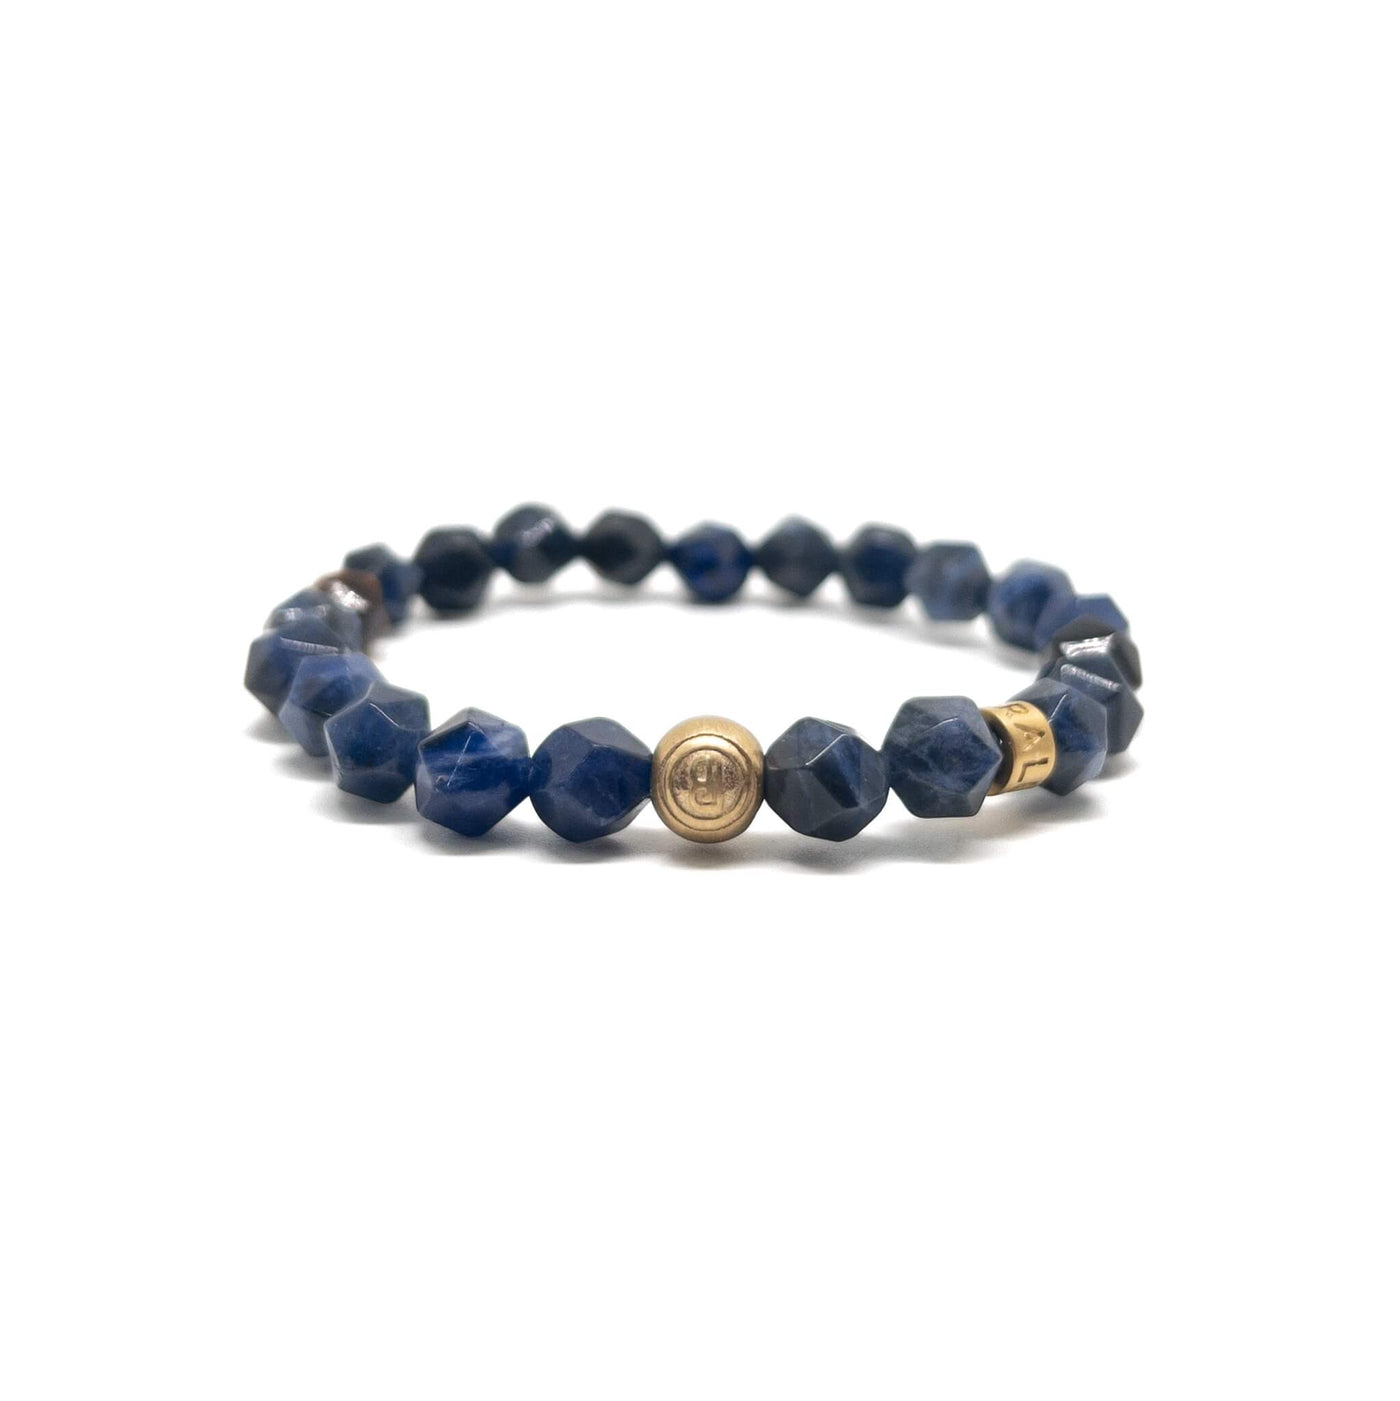 The Faceted Blue Sodalite and Brown Tiger eye Signed Gold Plated Bracelet